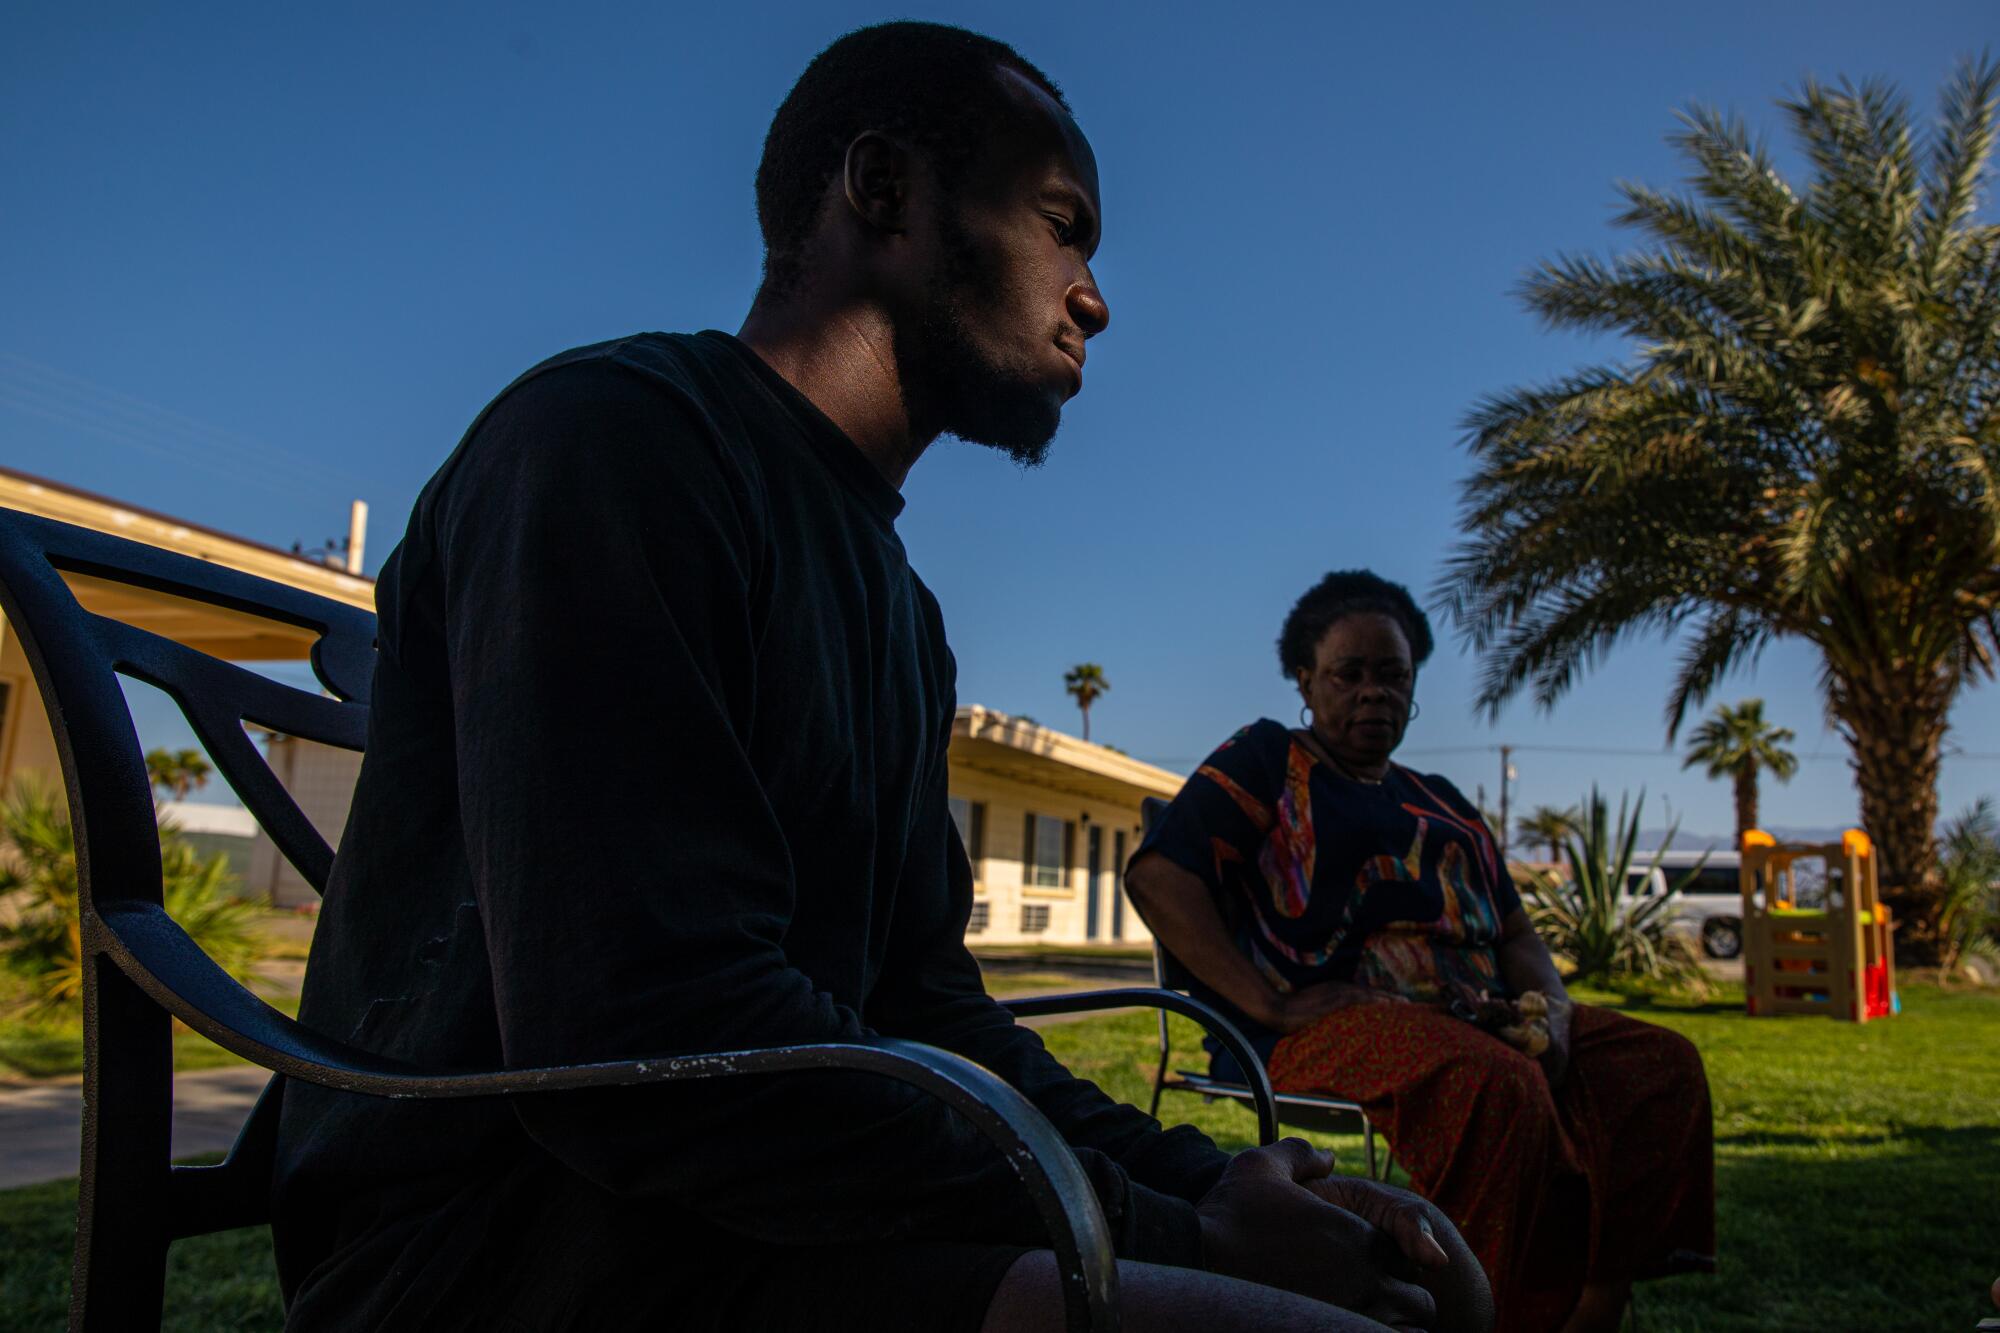 Angolan asylum seekers are staying at a long-term shelter provided by Galilee Center